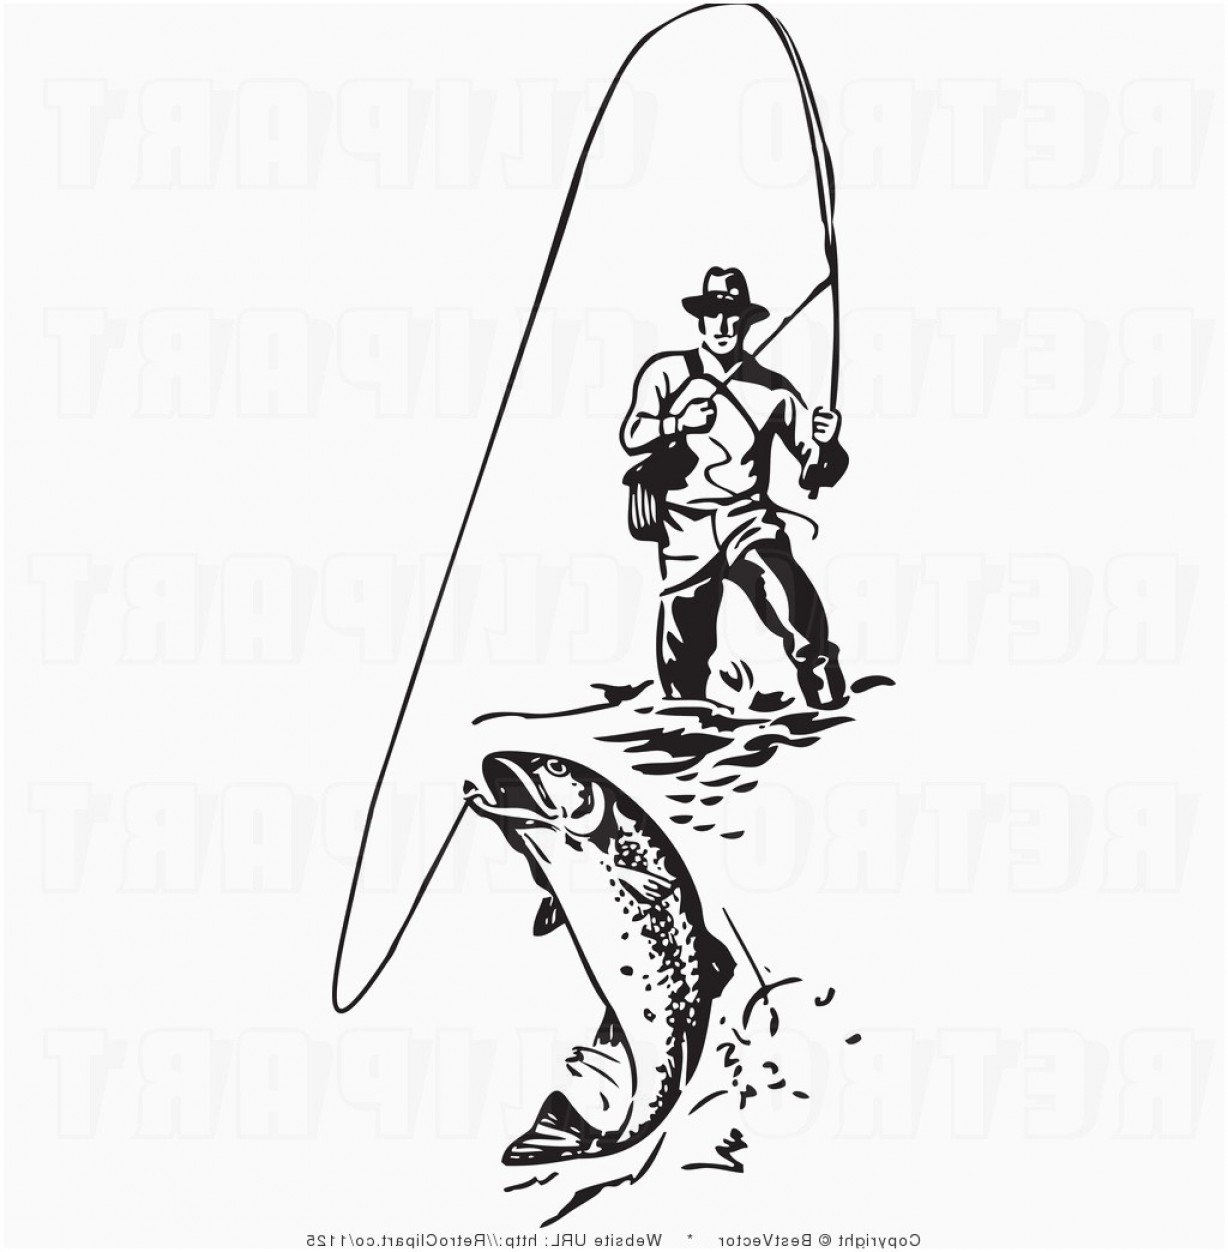 Fly fishing clipart.